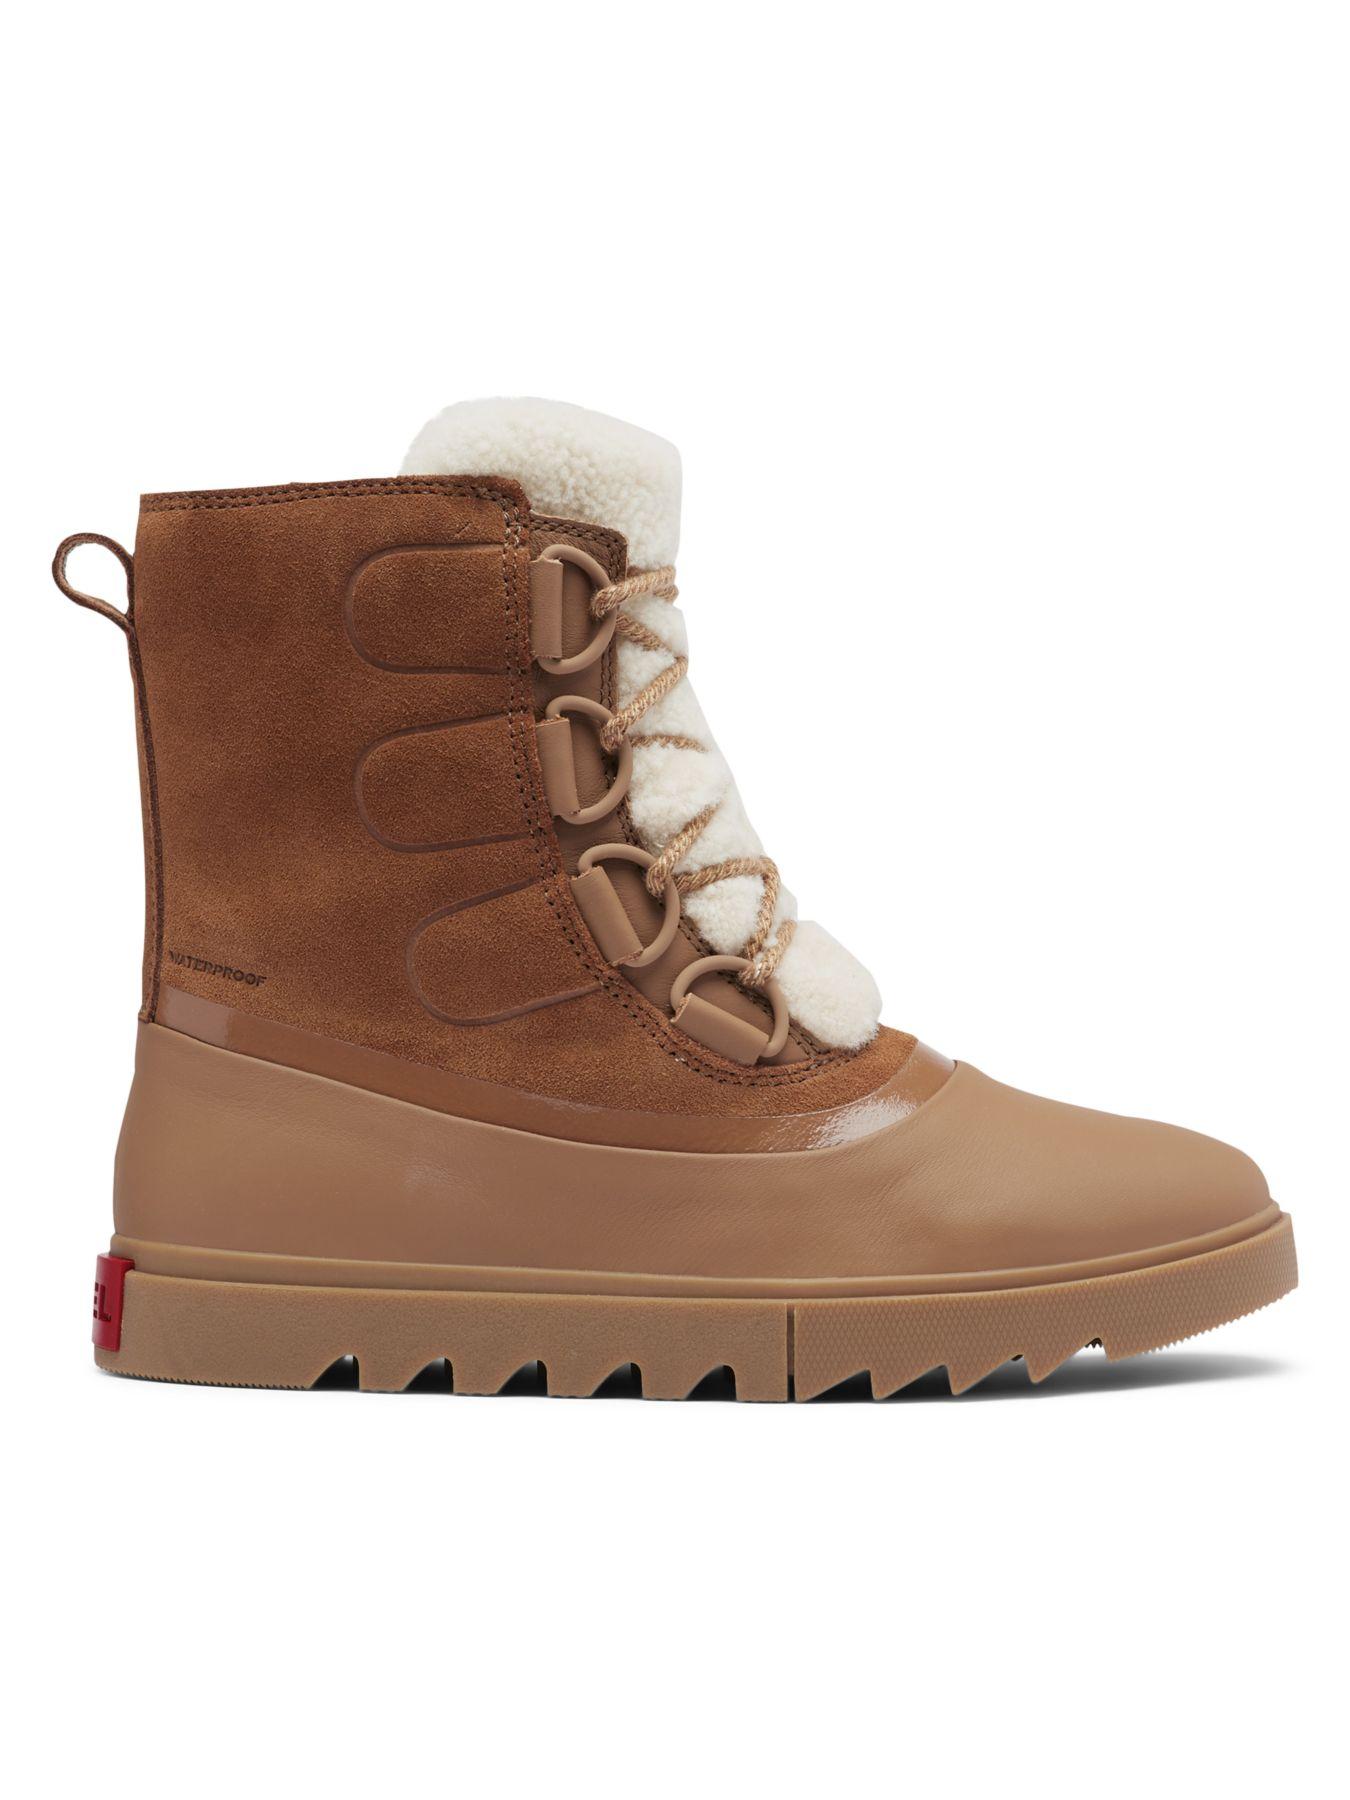 Sorel Joan Of Arctic Next Lite Shearling-trimmed Leather Boots in Brown ...